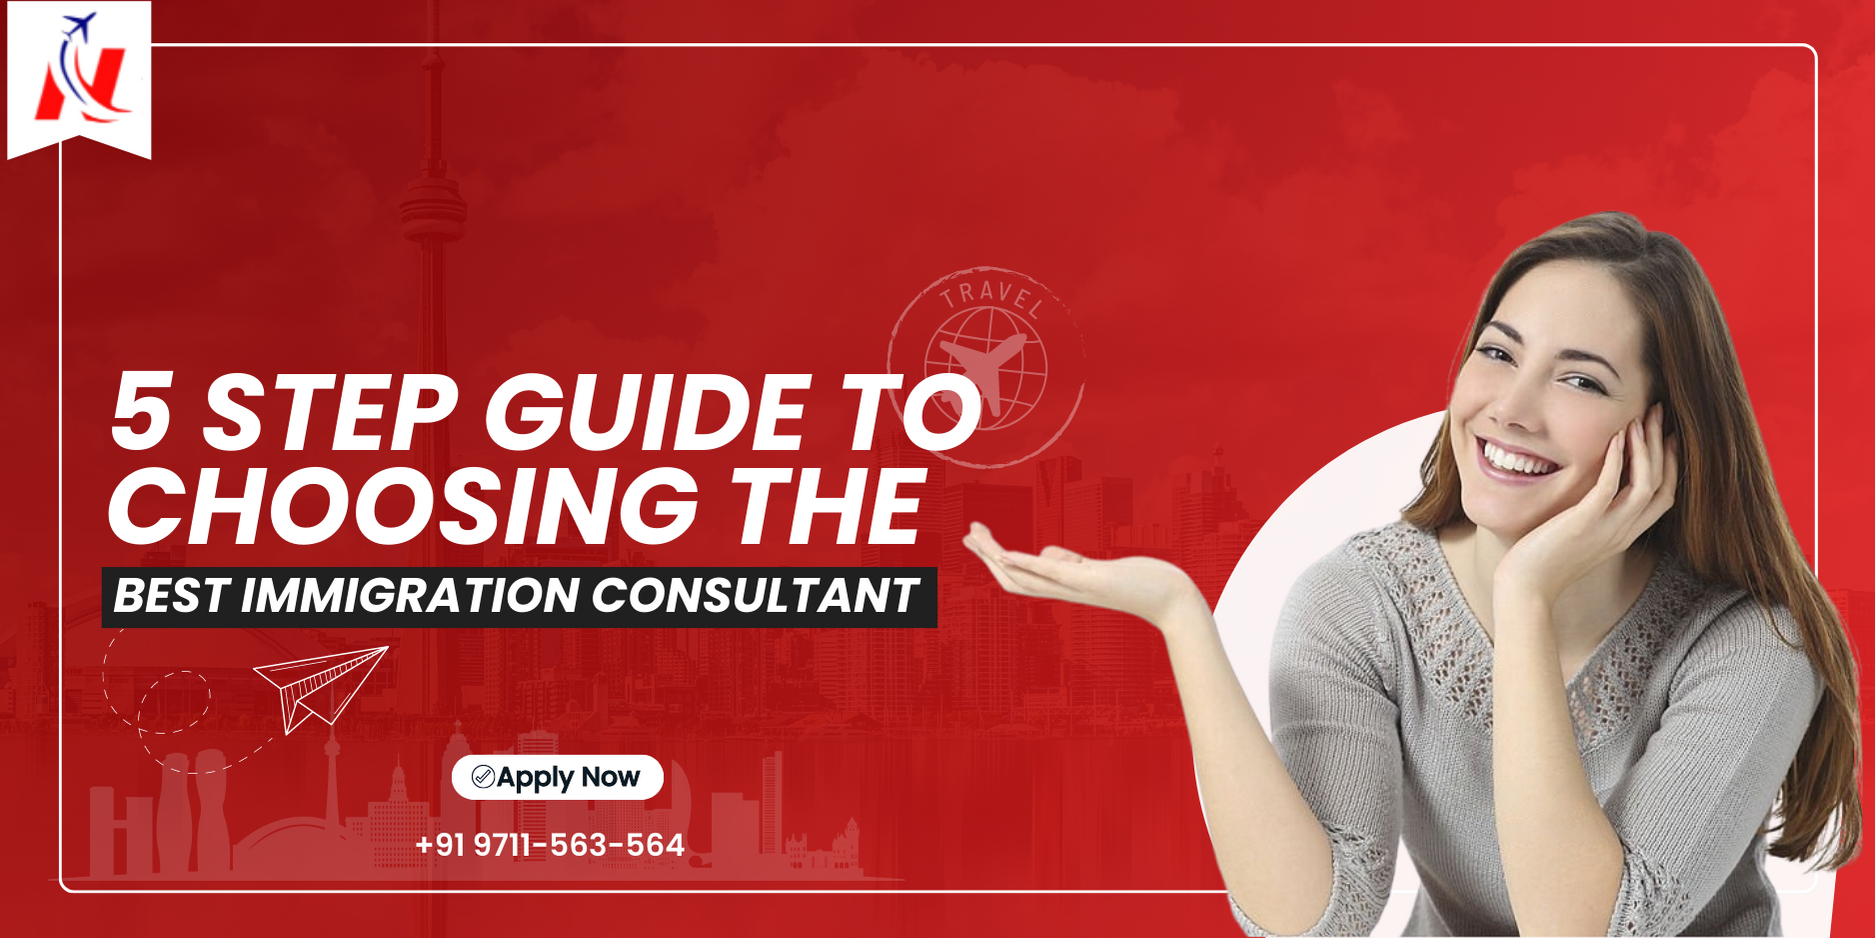 5 step guide to choosing the best immigration consultant